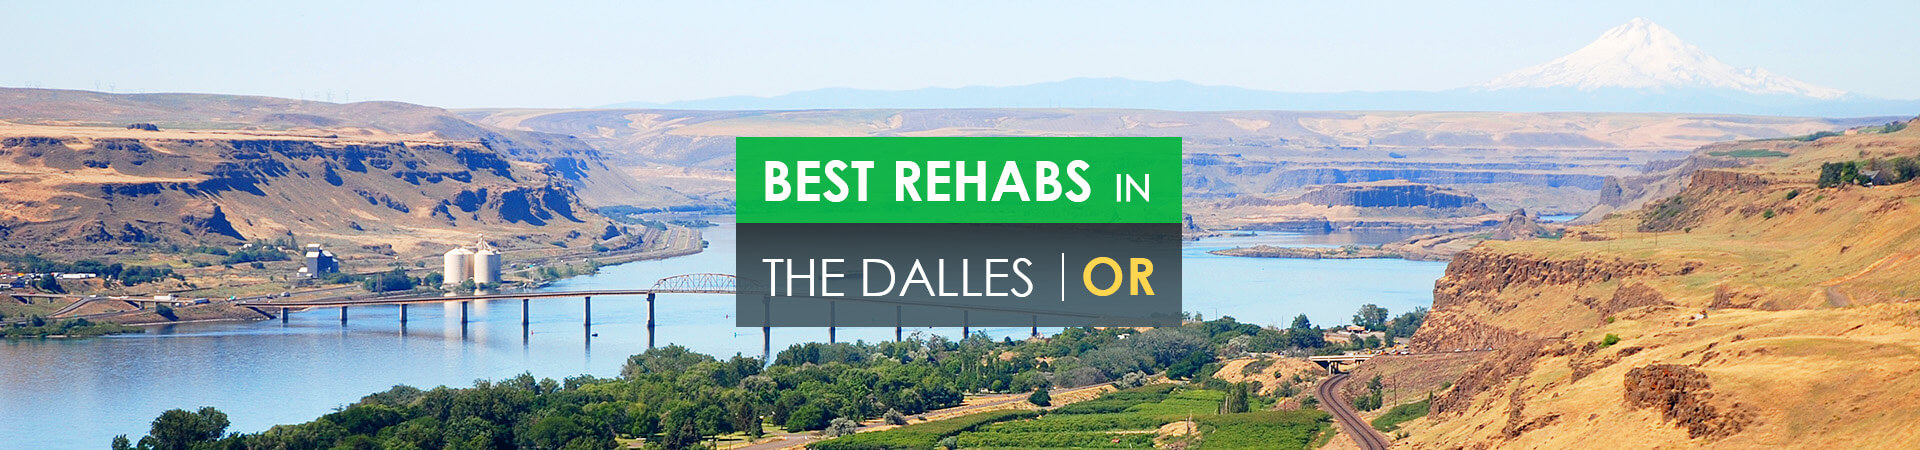 Best rehabs in The Dalles, OR